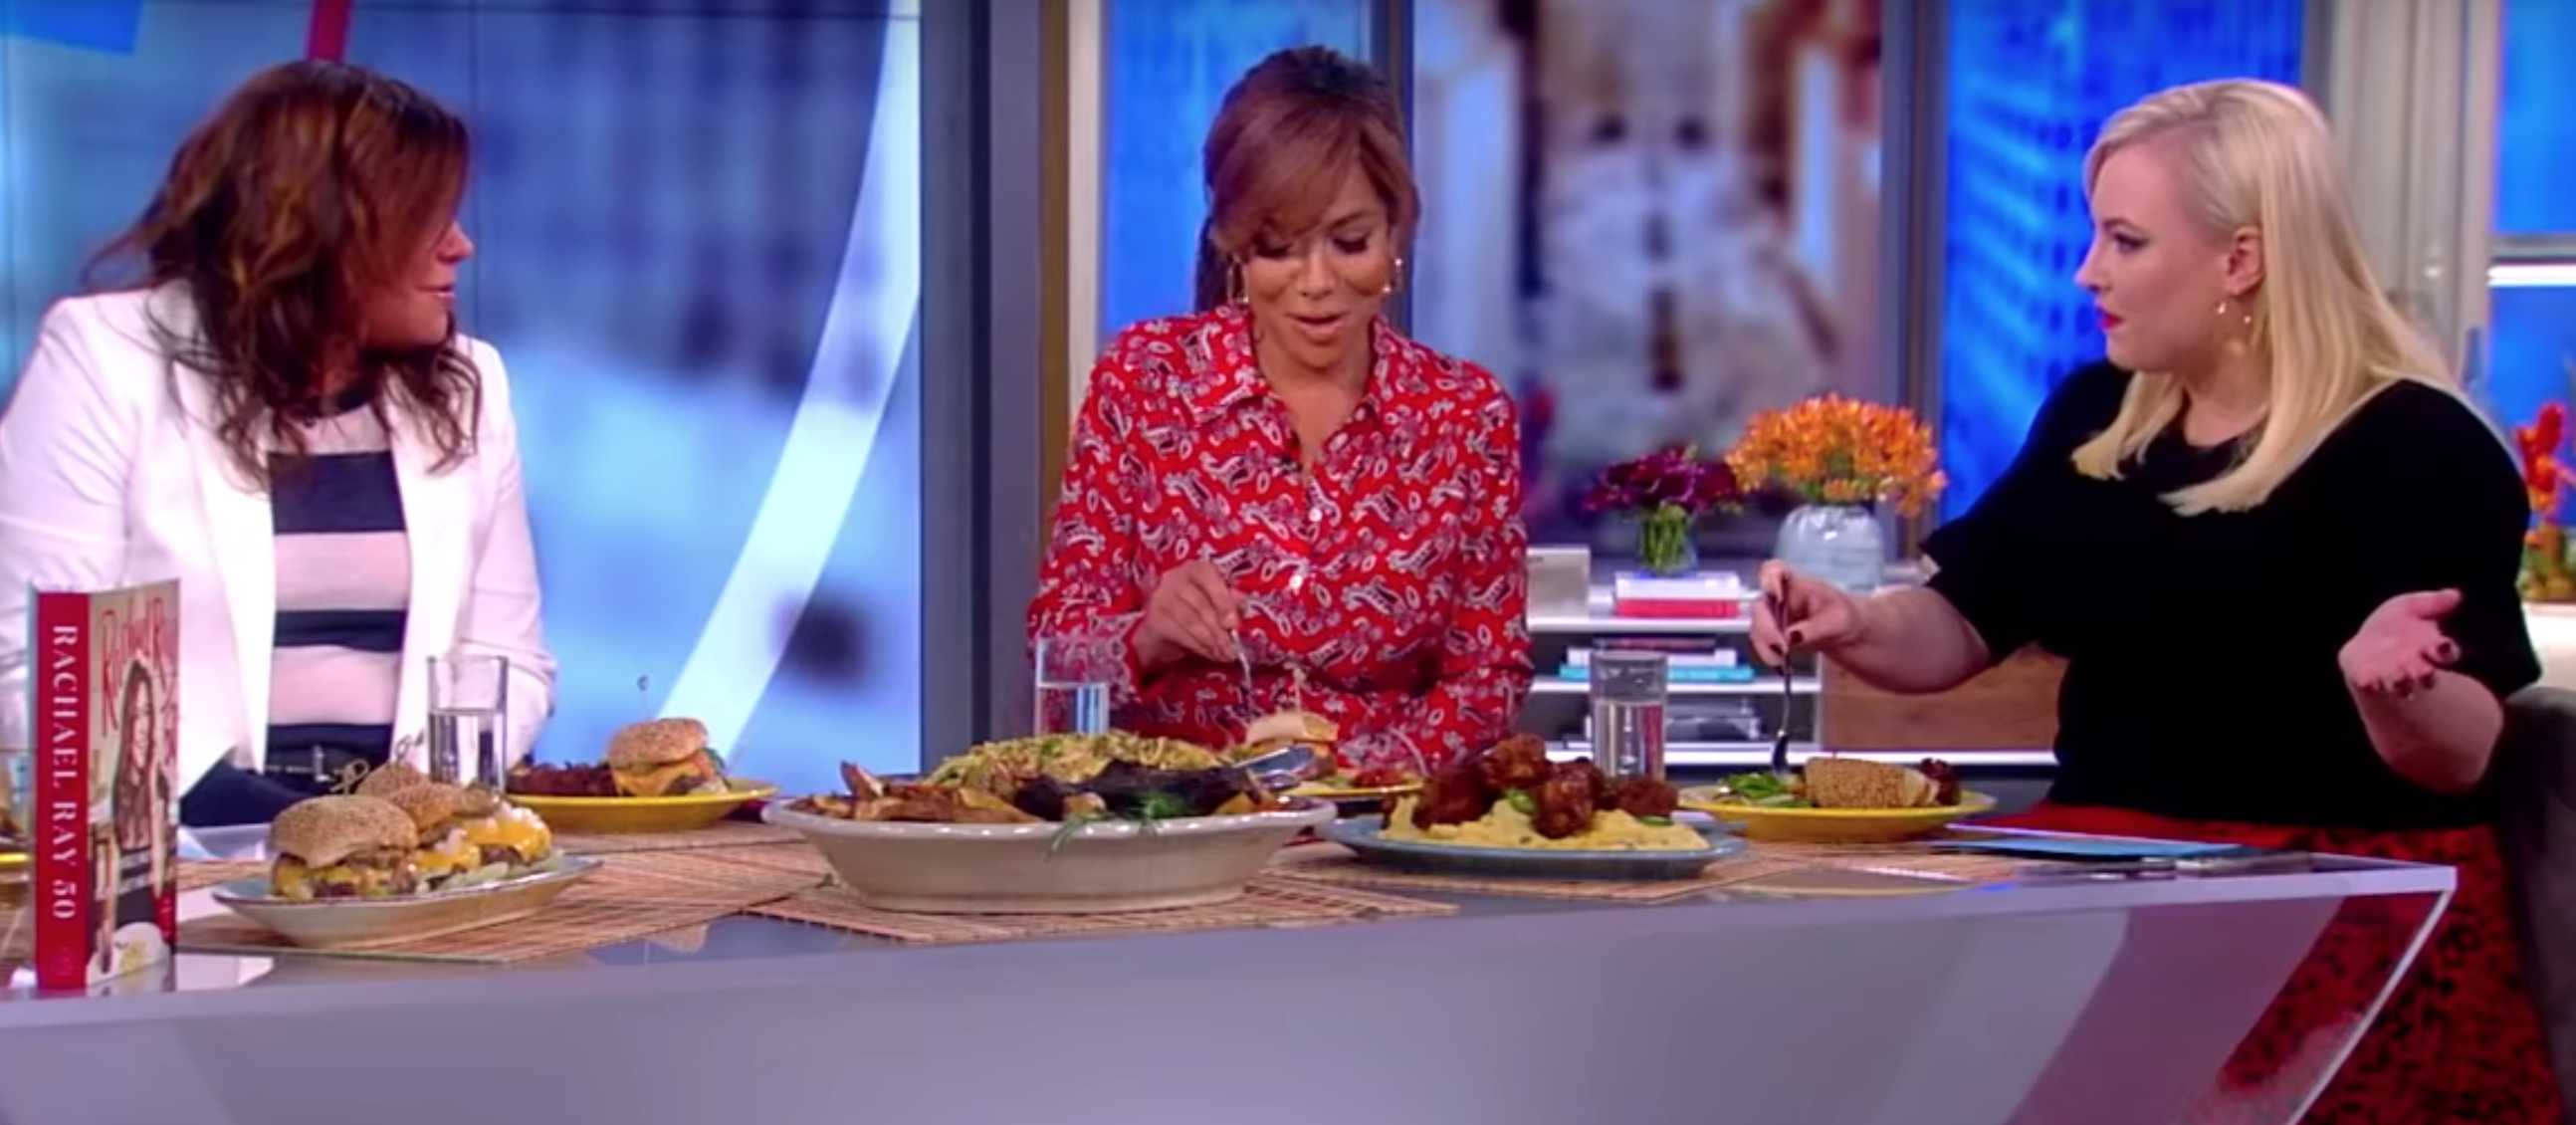 "The View" co-hosts enjoy Rachael Ray's recipes during the show. | Source: YouTube/TheView